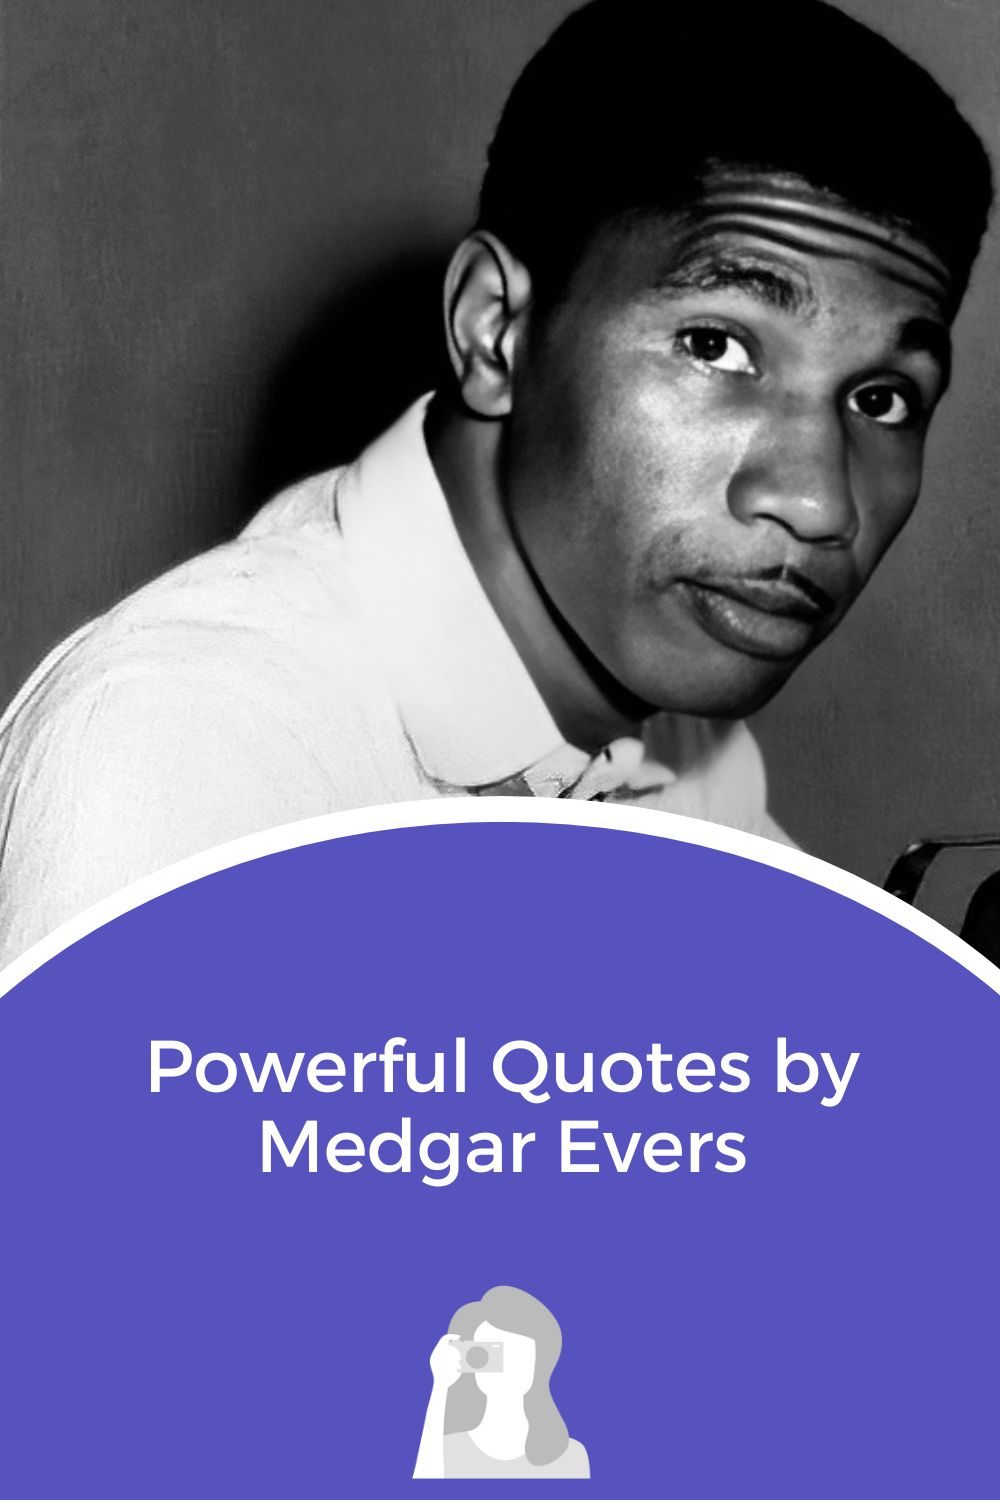 Medgar Evers Quotes - Pin 3 - JPG